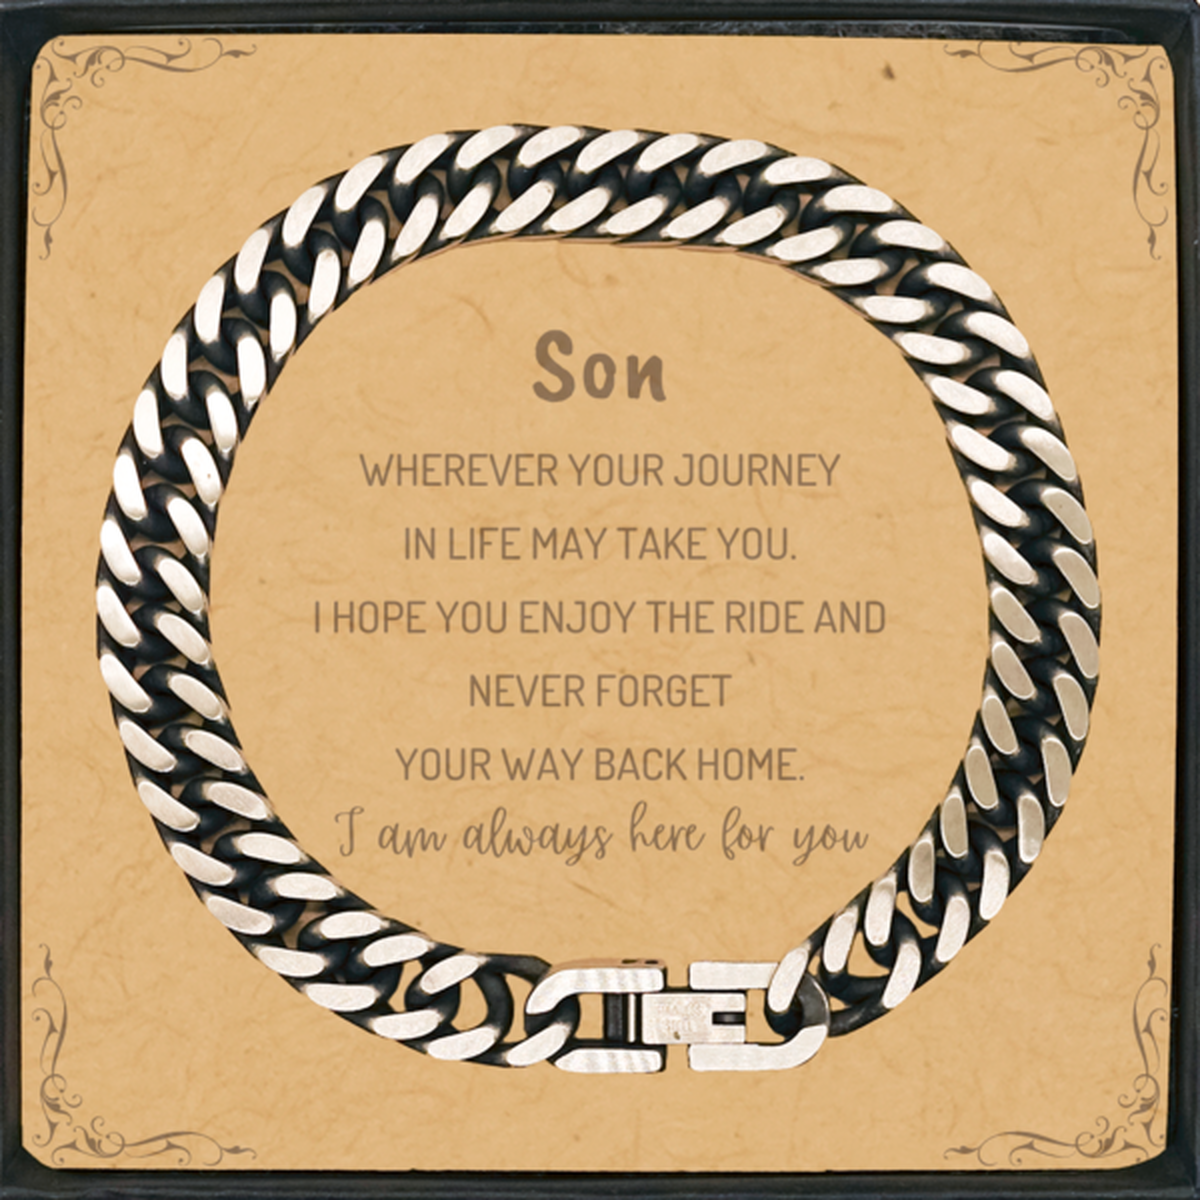 Son wherever your journey in life may take you, I am always here for you Son Cuban Link Chain Bracelet, Awesome Christmas Gifts For Son Message Card, Son Birthday Gifts for Men Women Family Loved One